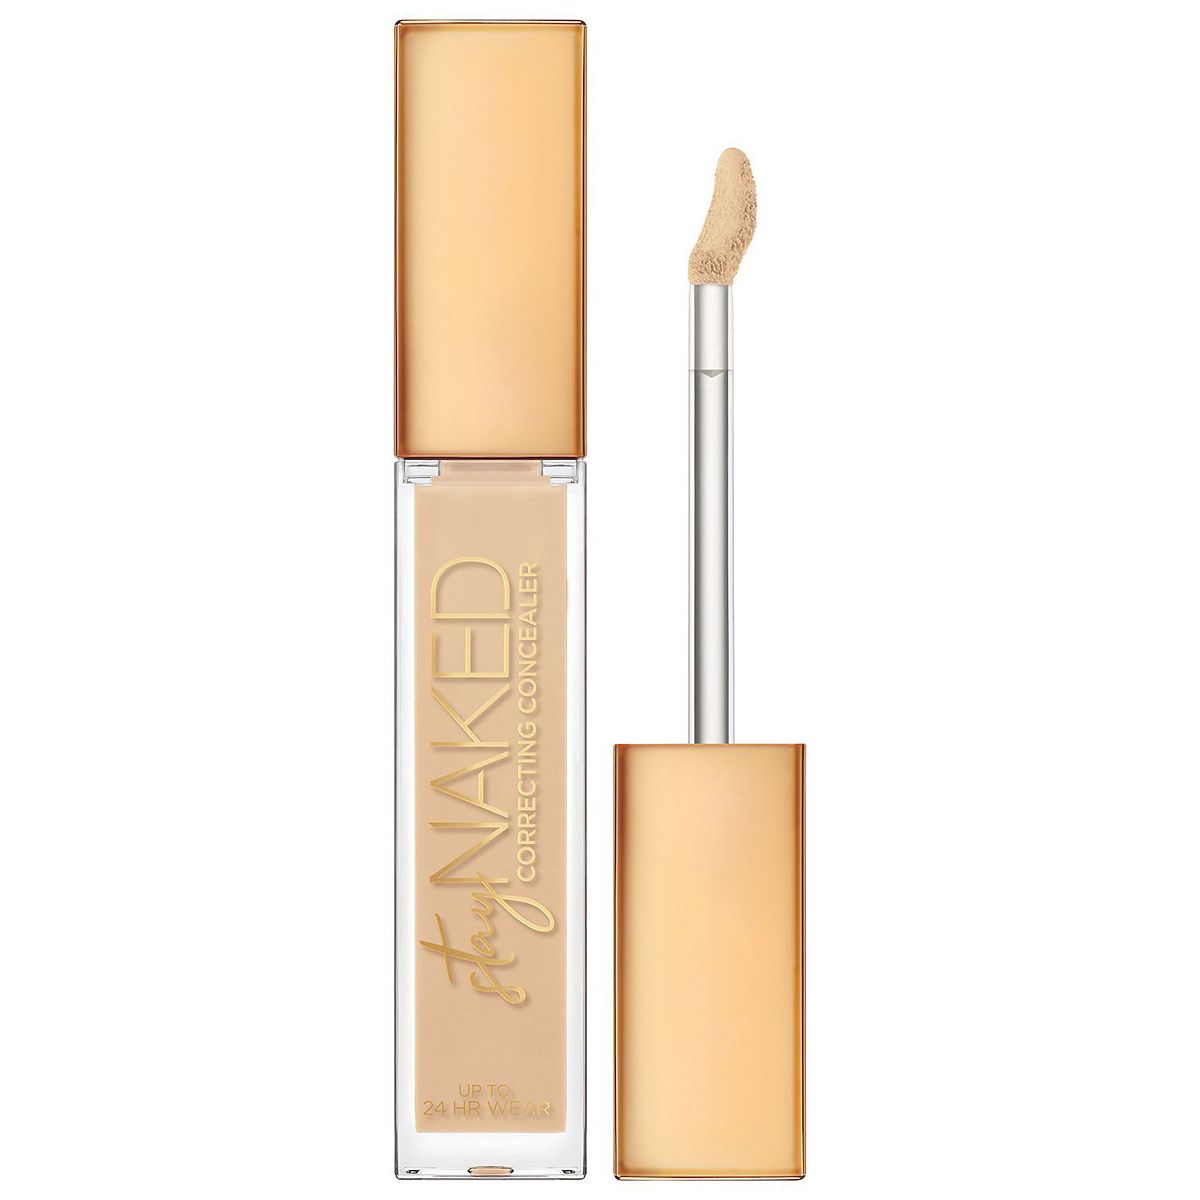 Urban Decay Stay Naked Color Correcting Concealer $14.50, Stay Naked Lightweight Liquid Foundation $19.50 + Free Store Pickup at Macy's or Kohl's